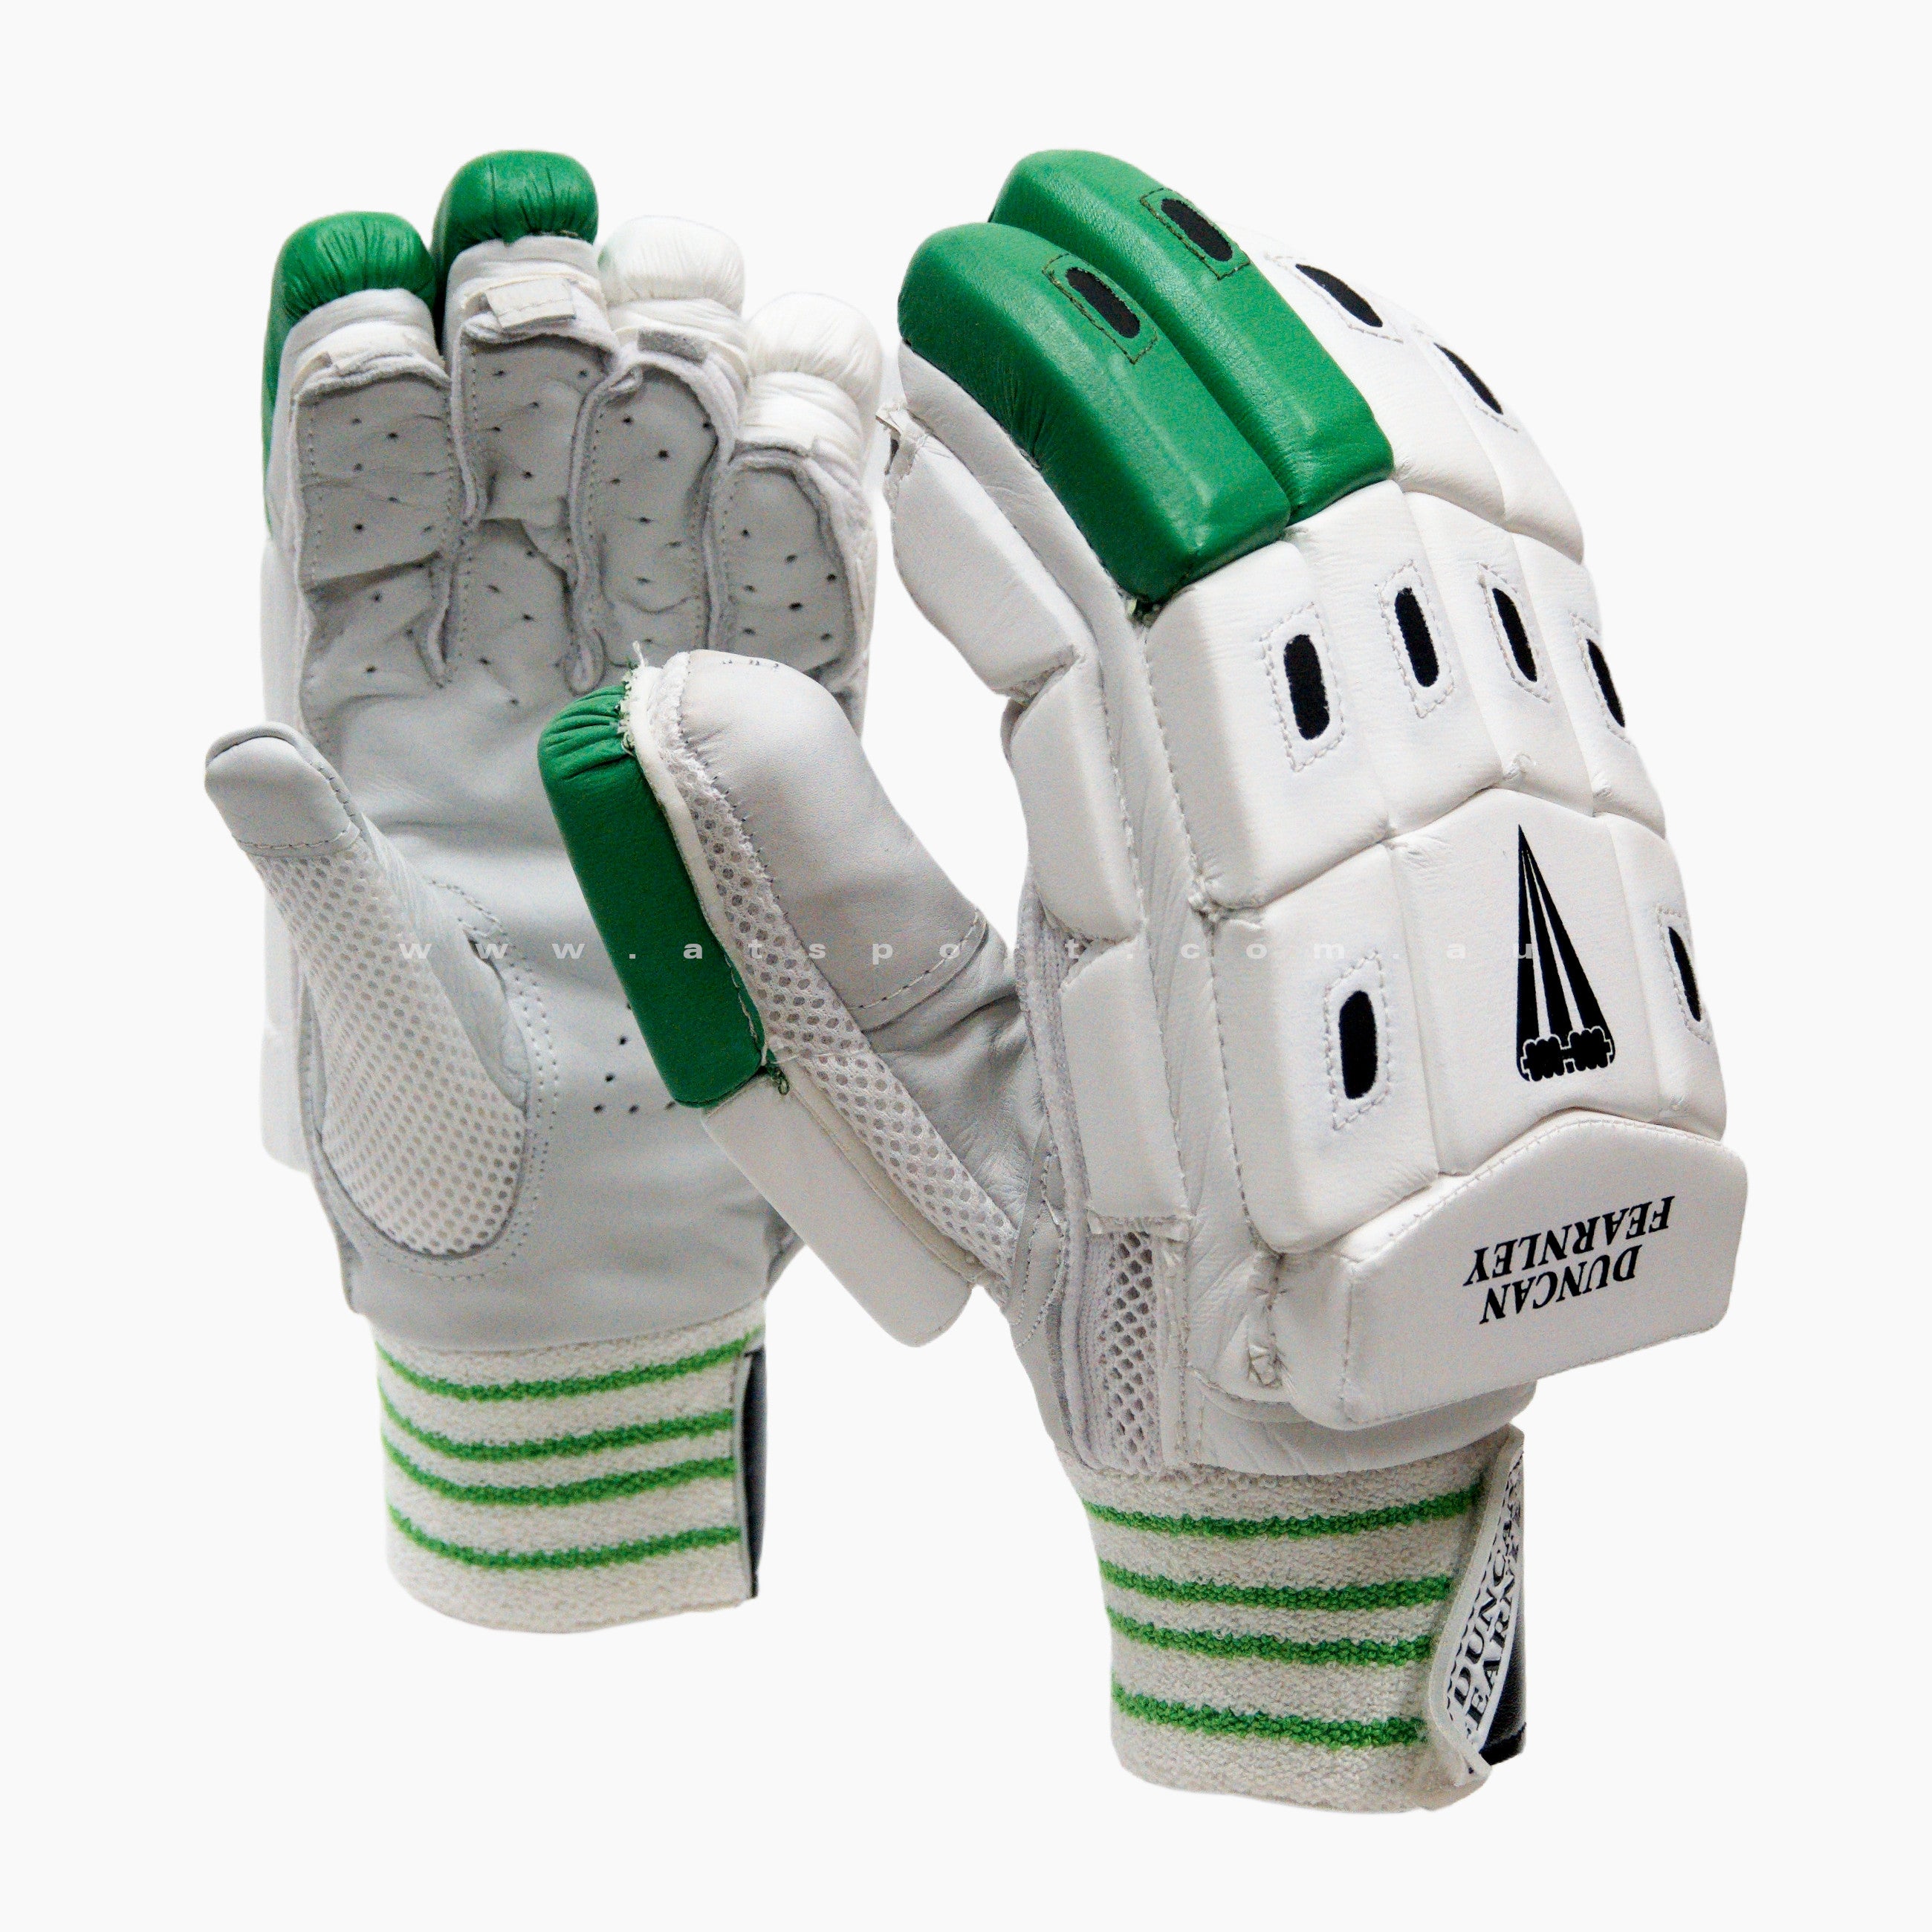 Duncan Fearnley Magnum Cricket Batting Gloves - YOUTH